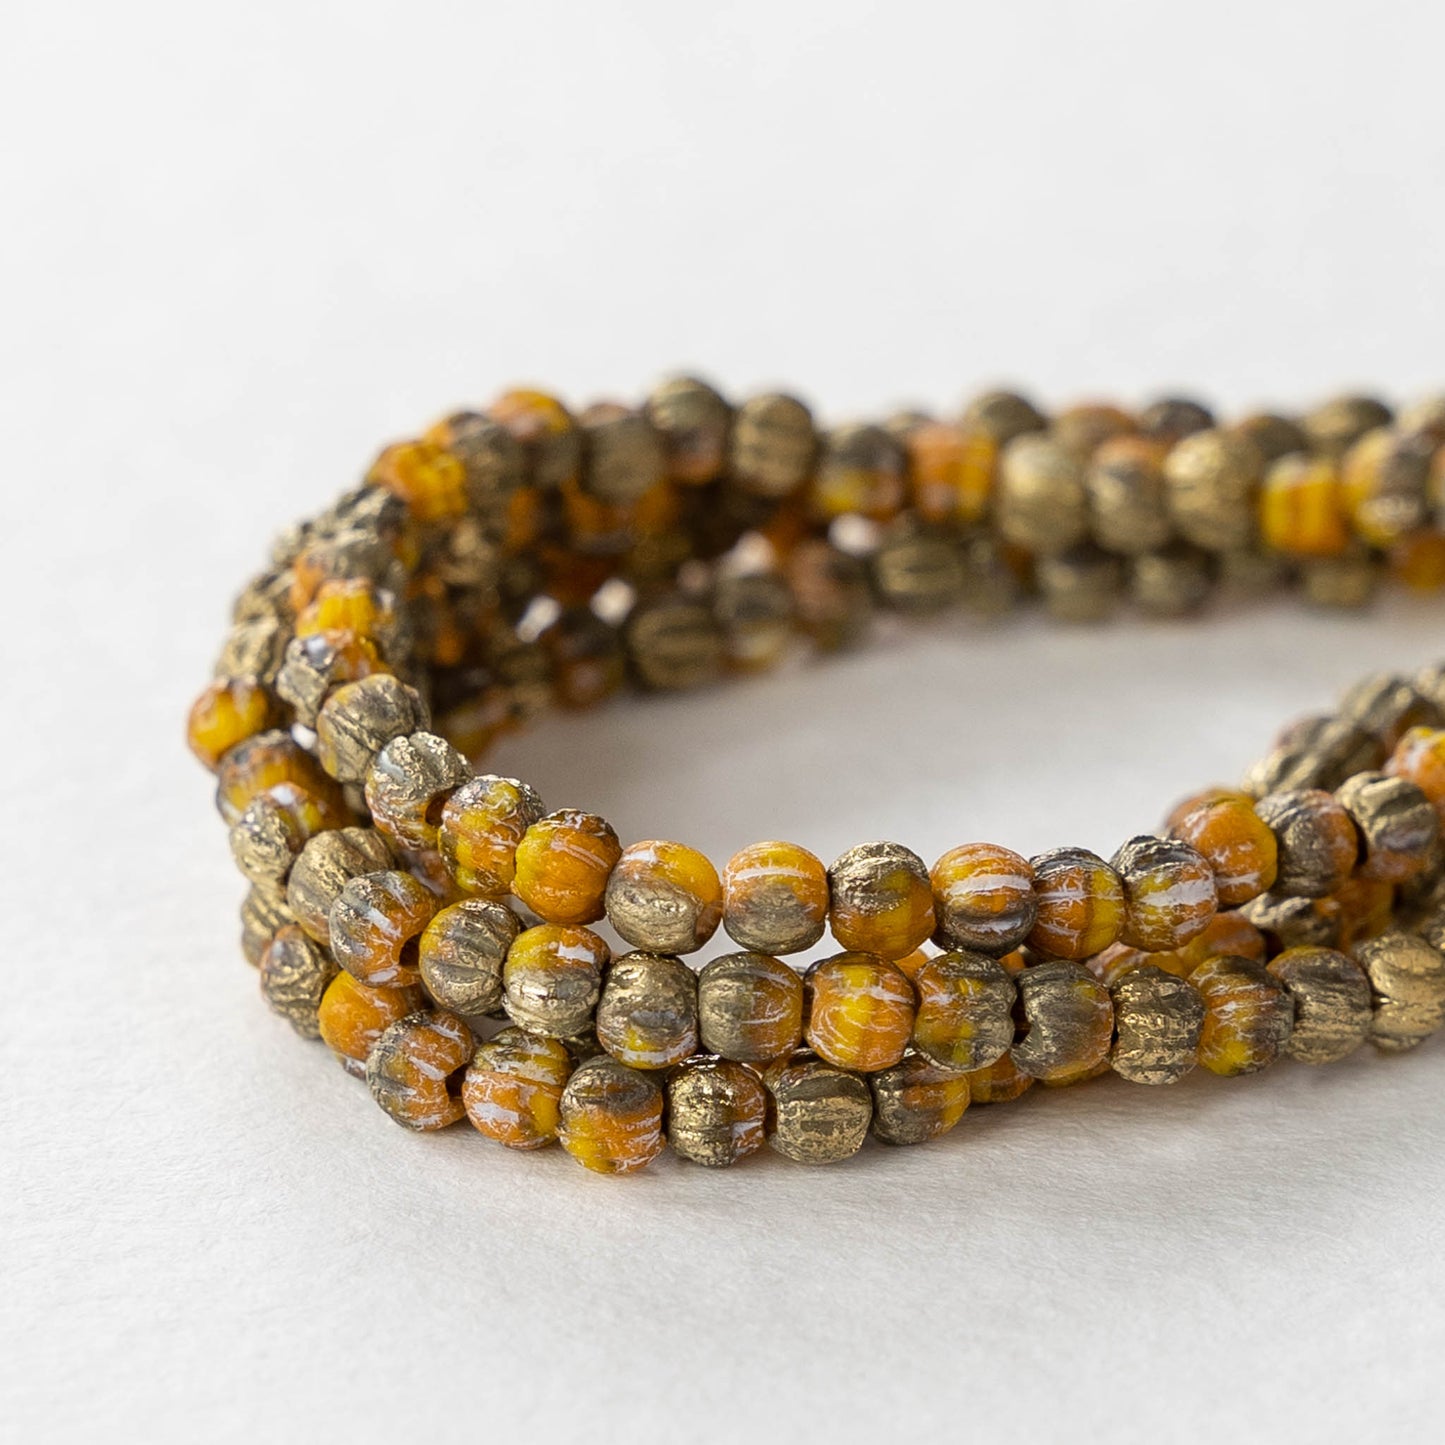 Load image into Gallery viewer, 3mm Melon Beads - Etched Orange Yellow with a Gold Finish - 50 Beads
